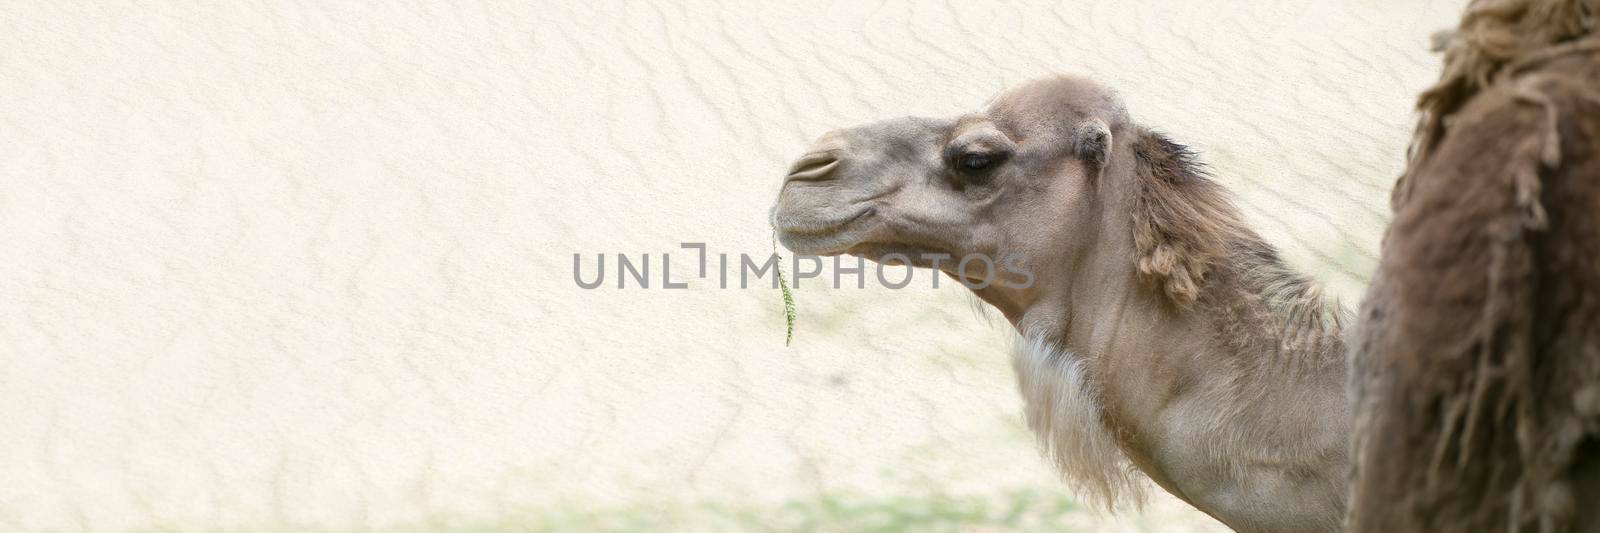 Camel in the desert, close-up. Camel's head close-up on the background of sand in the desert. by SERSOL